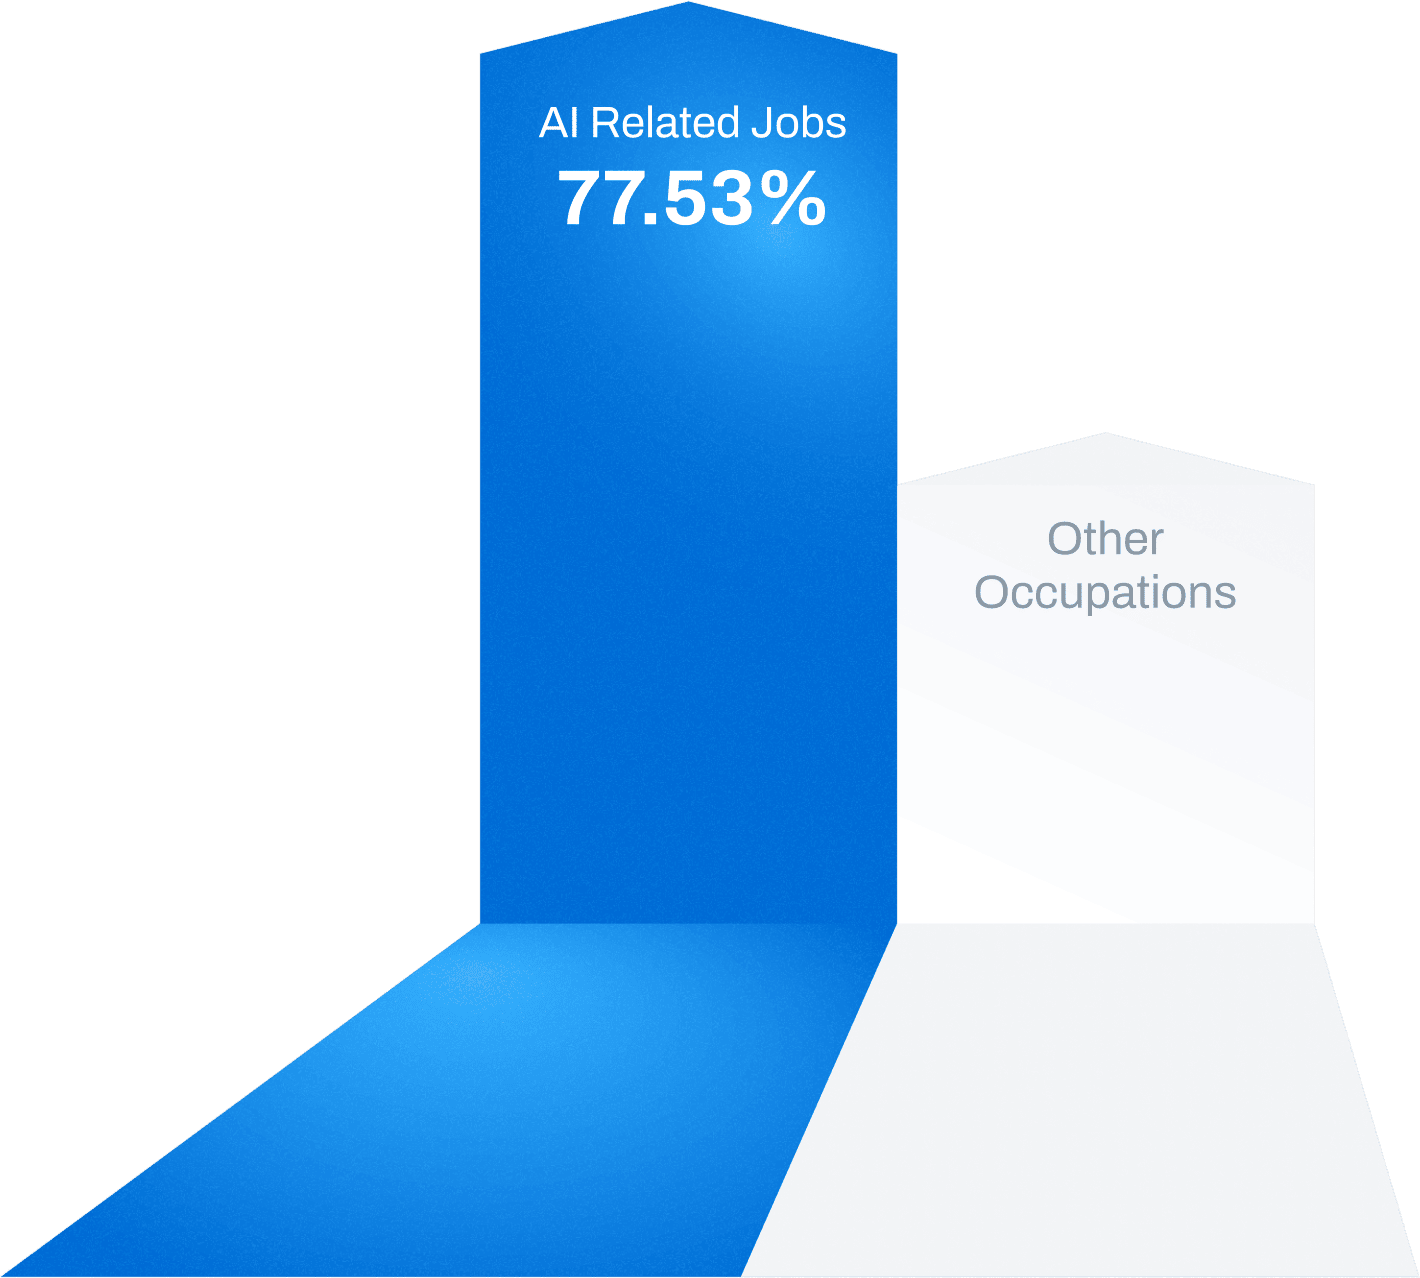 ai-related-job-salary-compared-to-other-occupations